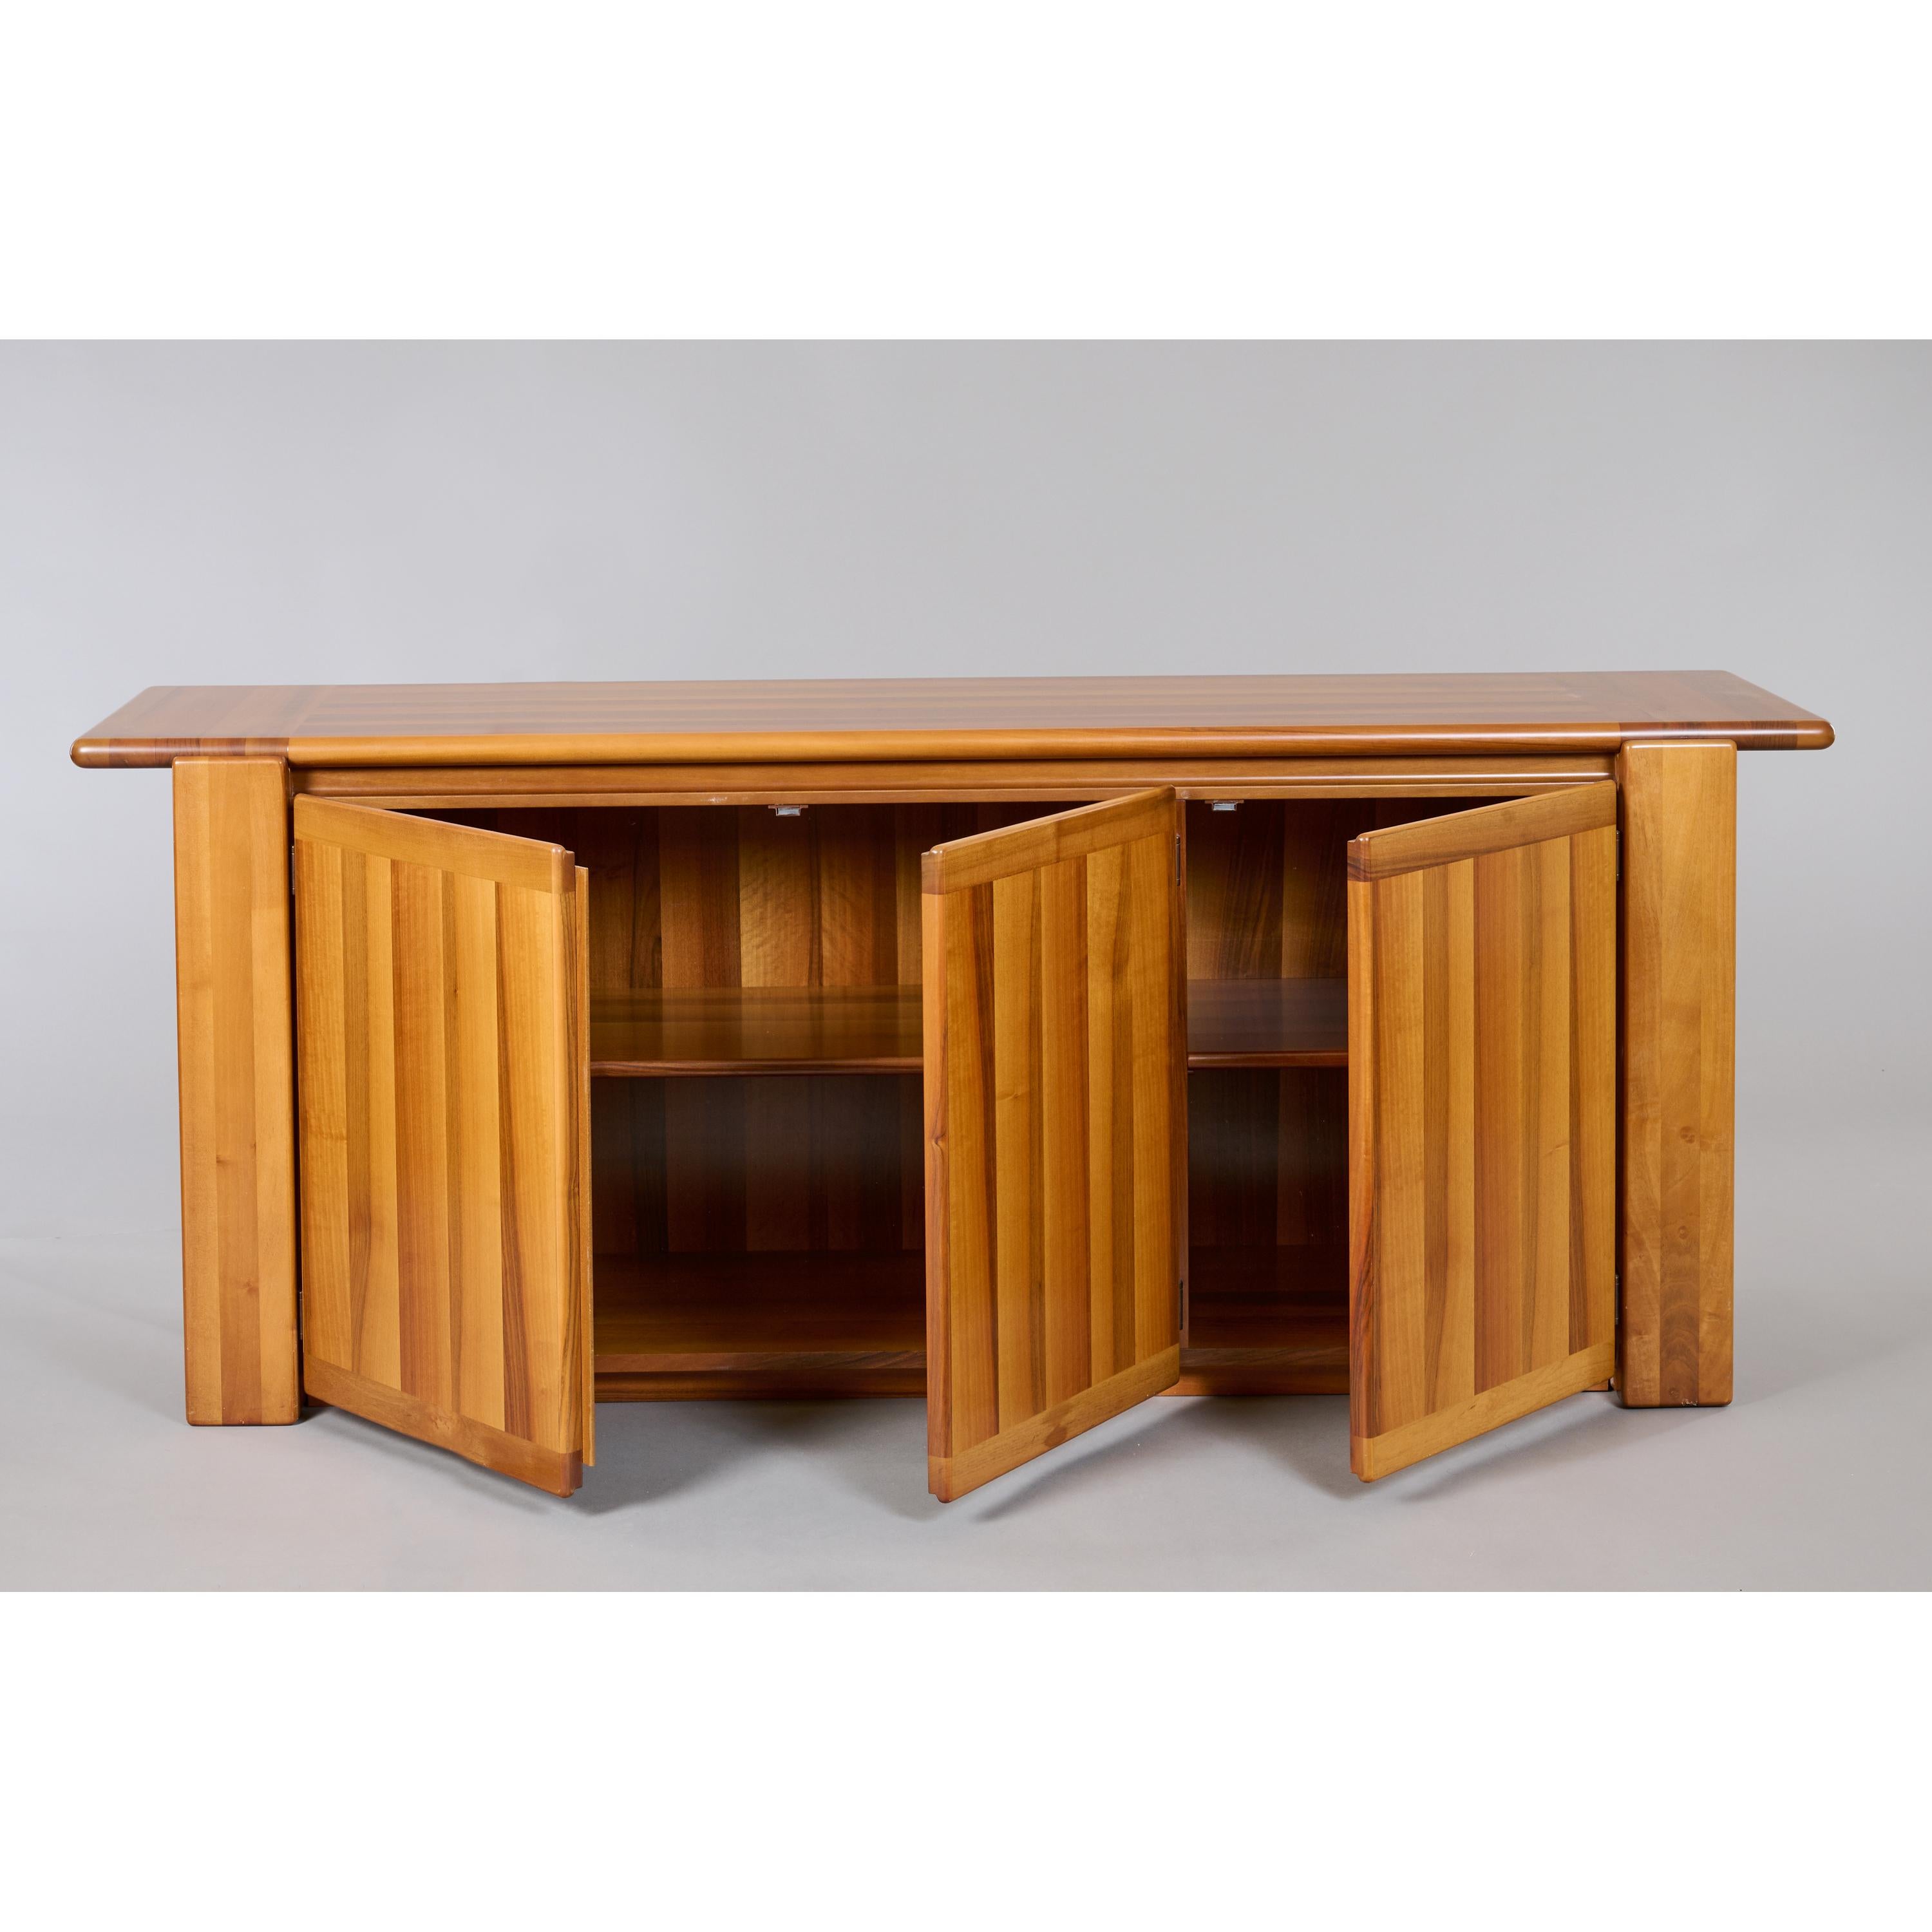 Italian Cabinet in Polished Walnut, Itso Pierre Chapo, Italy 1970s For Sale 3